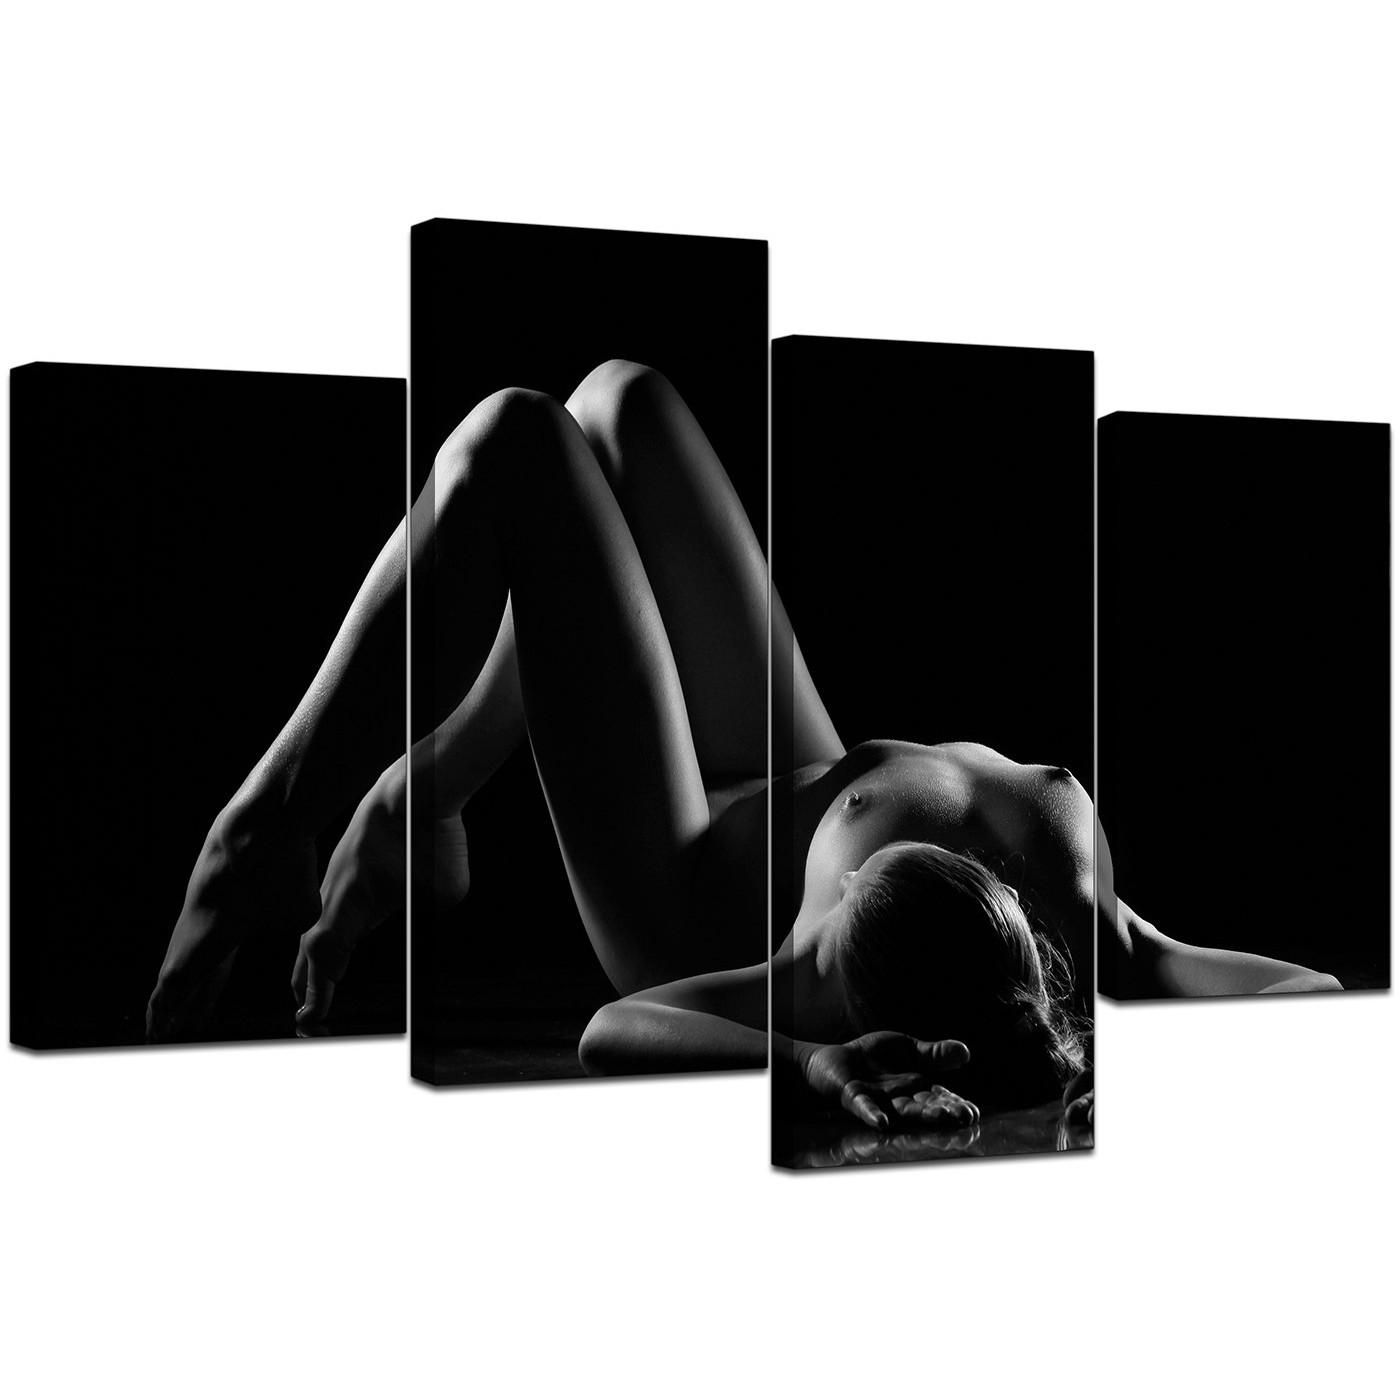 Sensual Canvas Art In Black & White For Your Bedroom Within Large Black And White Wall Art (View 10 of 20)